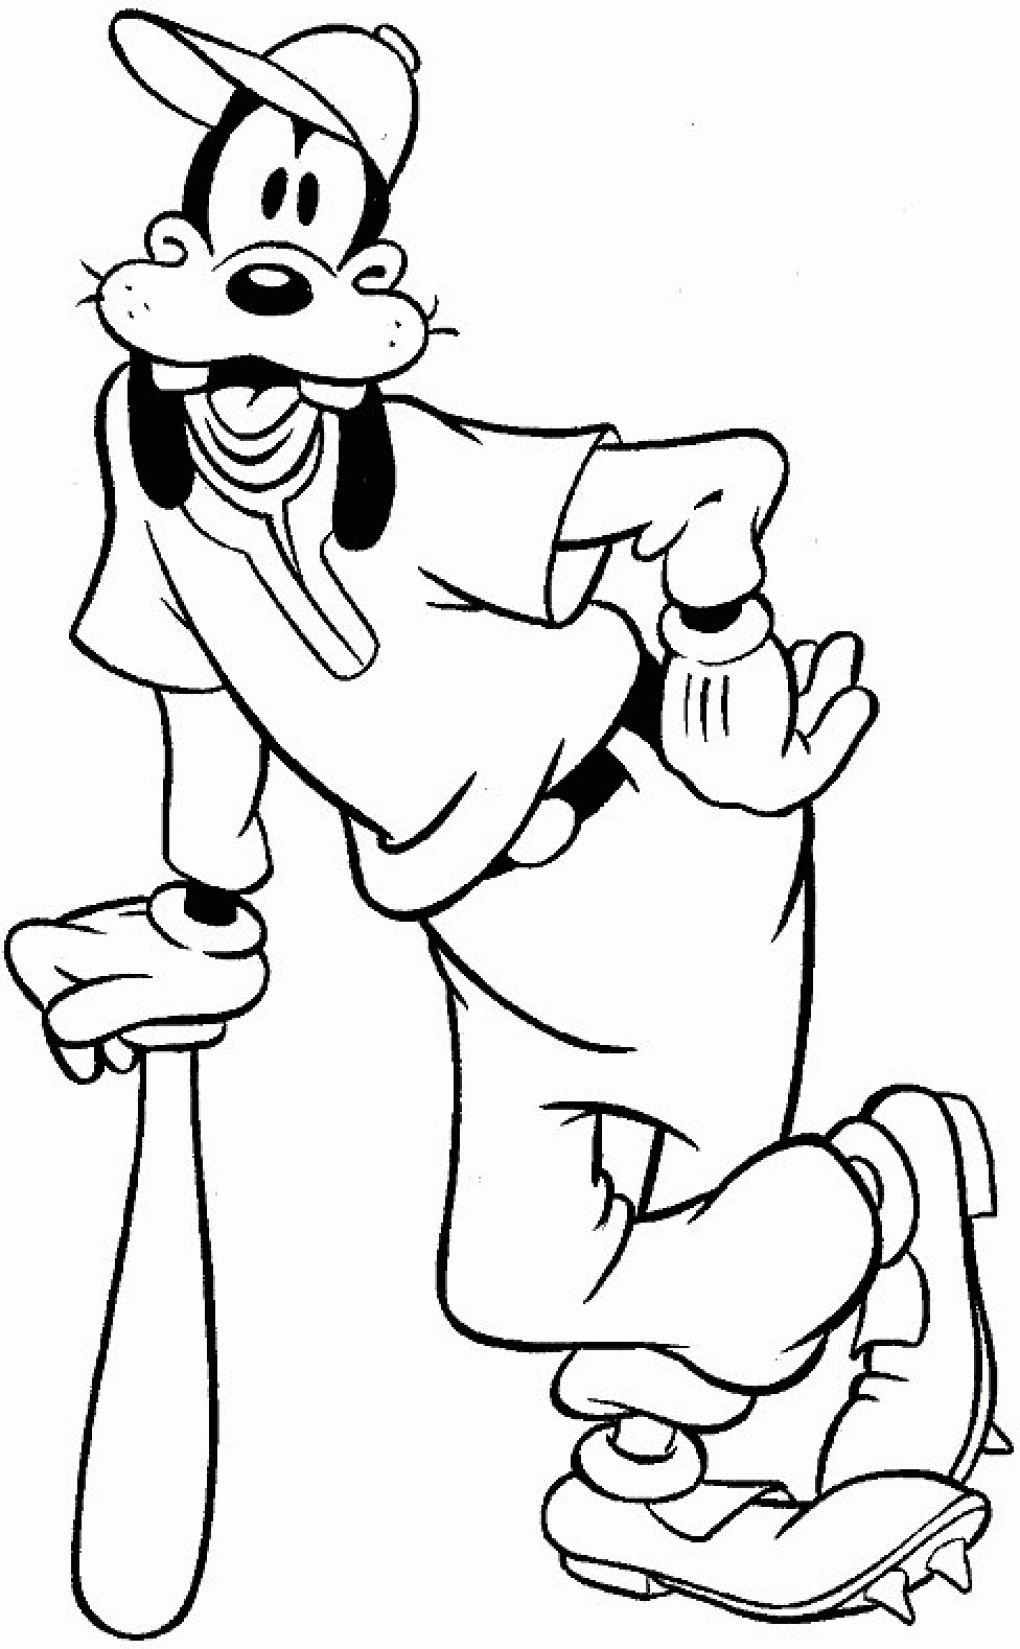 494 Cartoon Free Goofy Coloring Pages with Printable